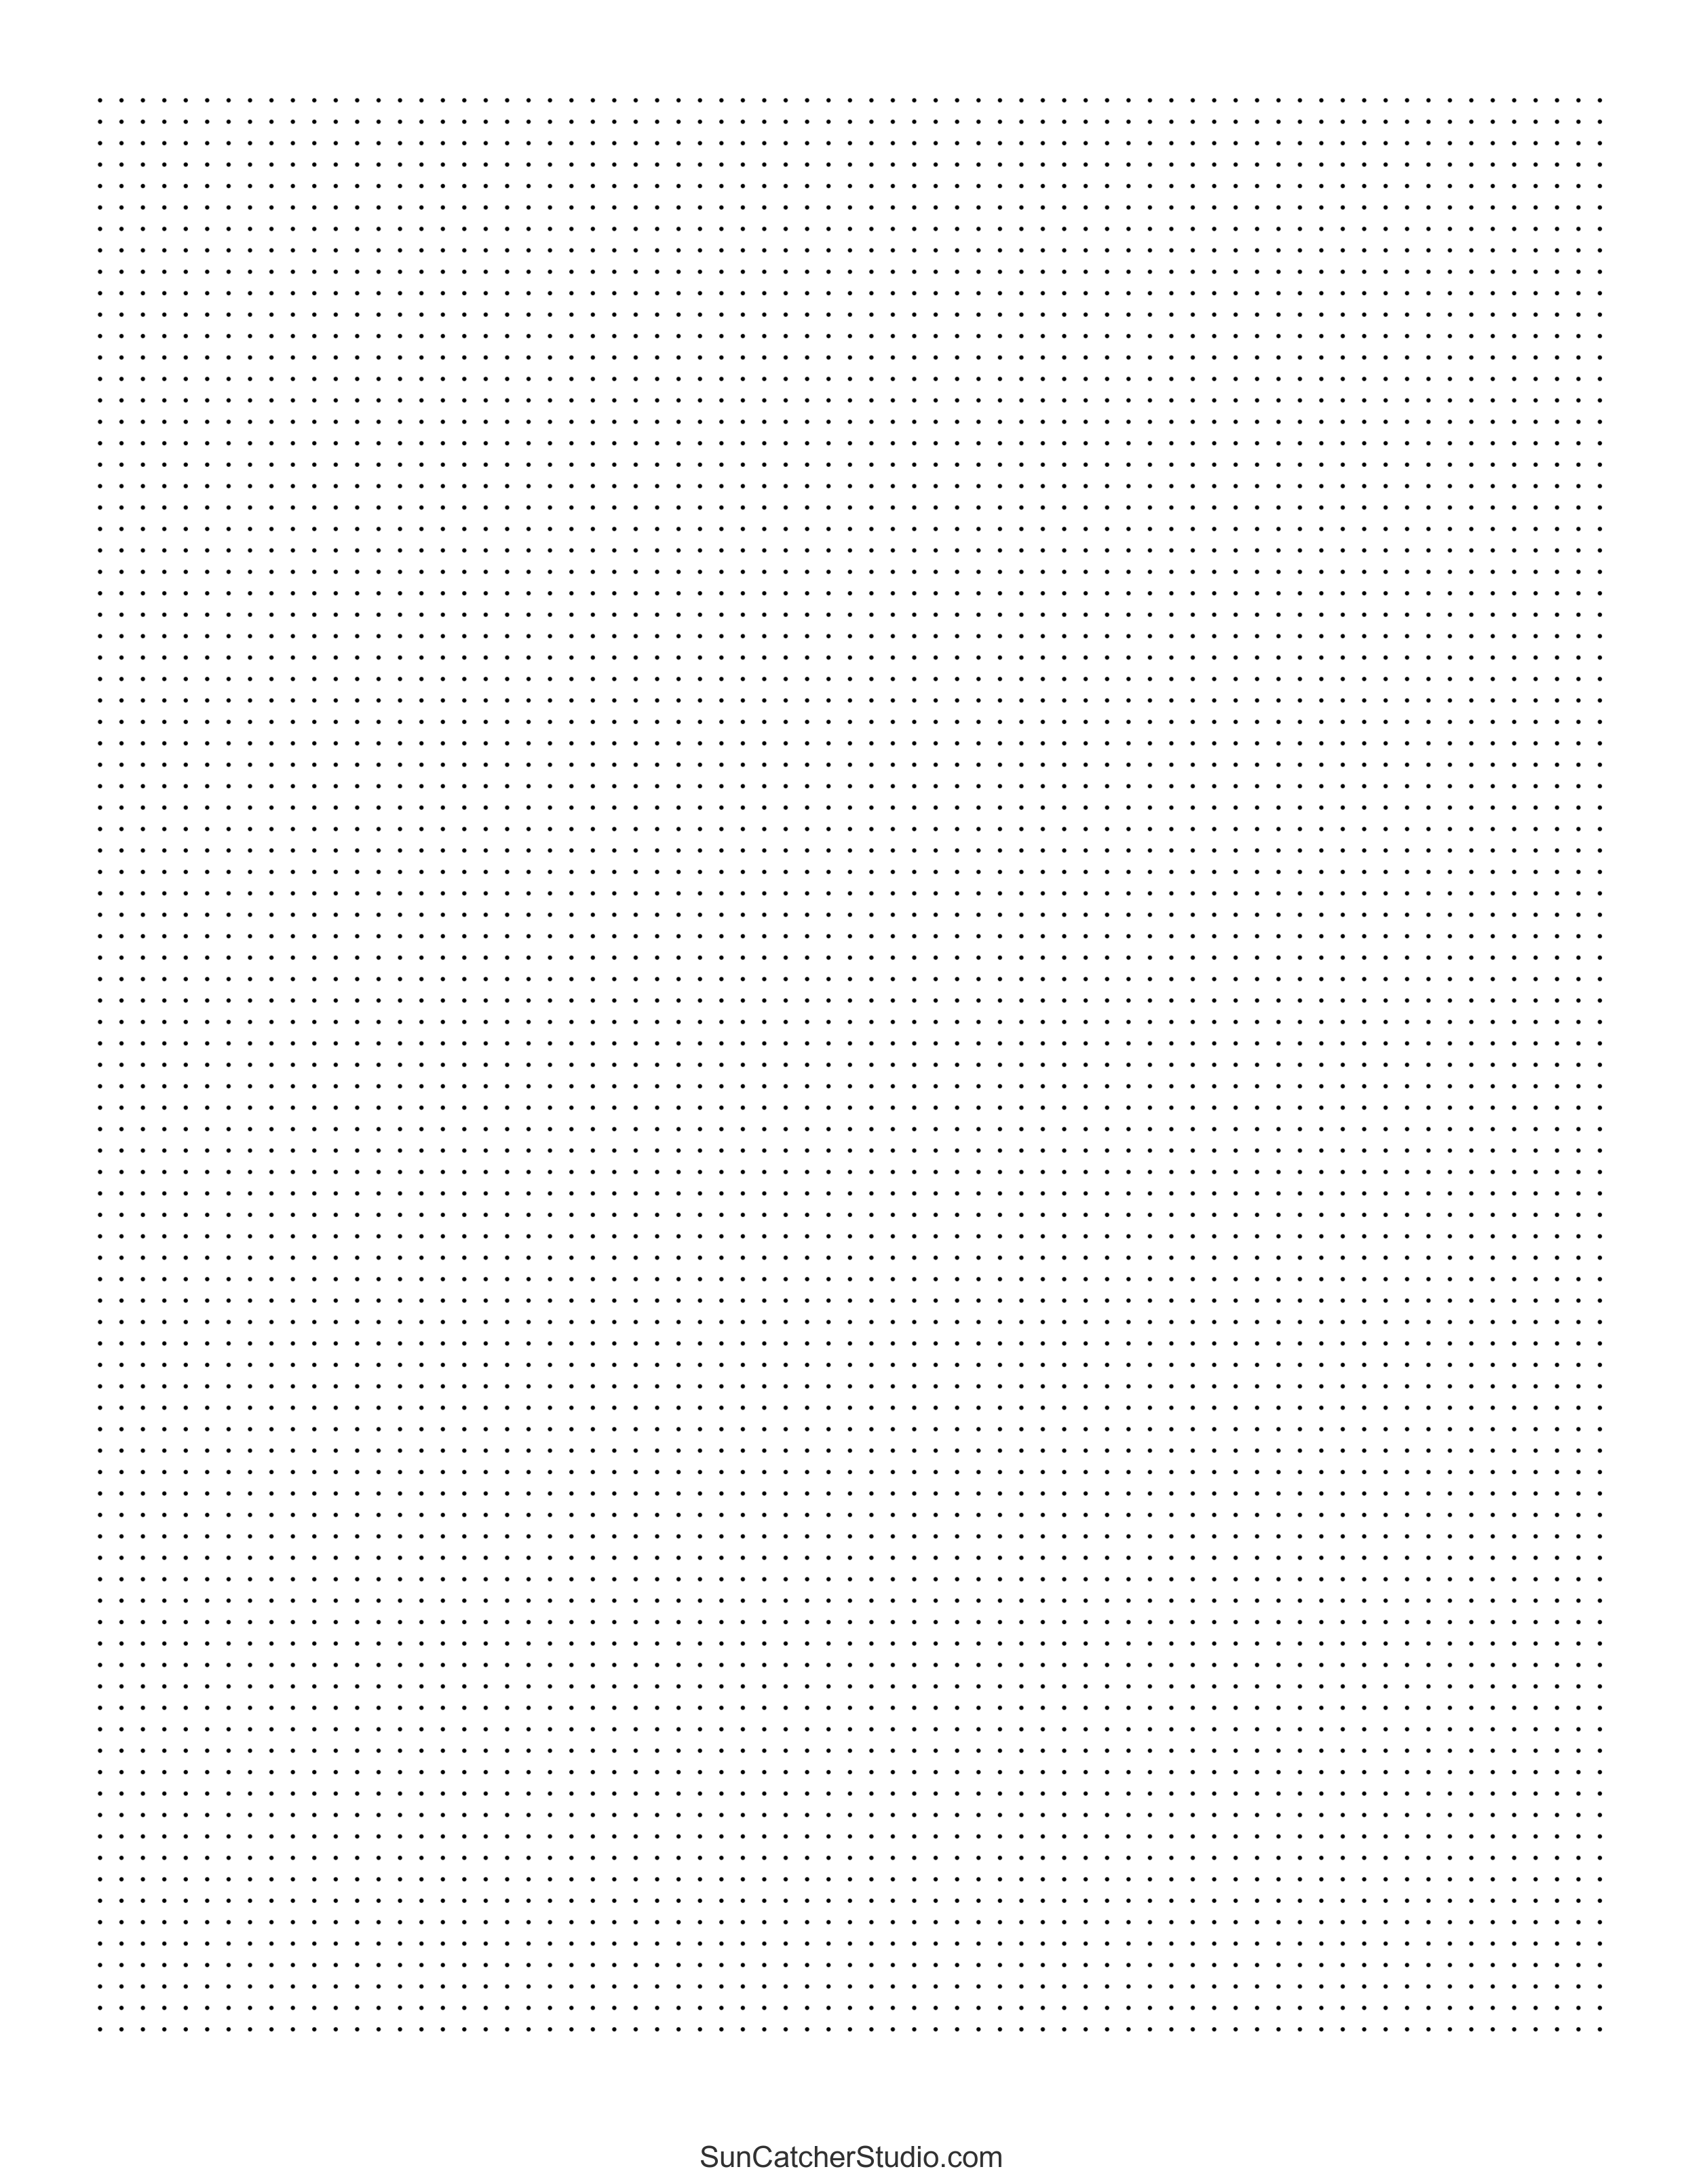 Printable Dot Paper with 25mm spacing on A4-sized paper